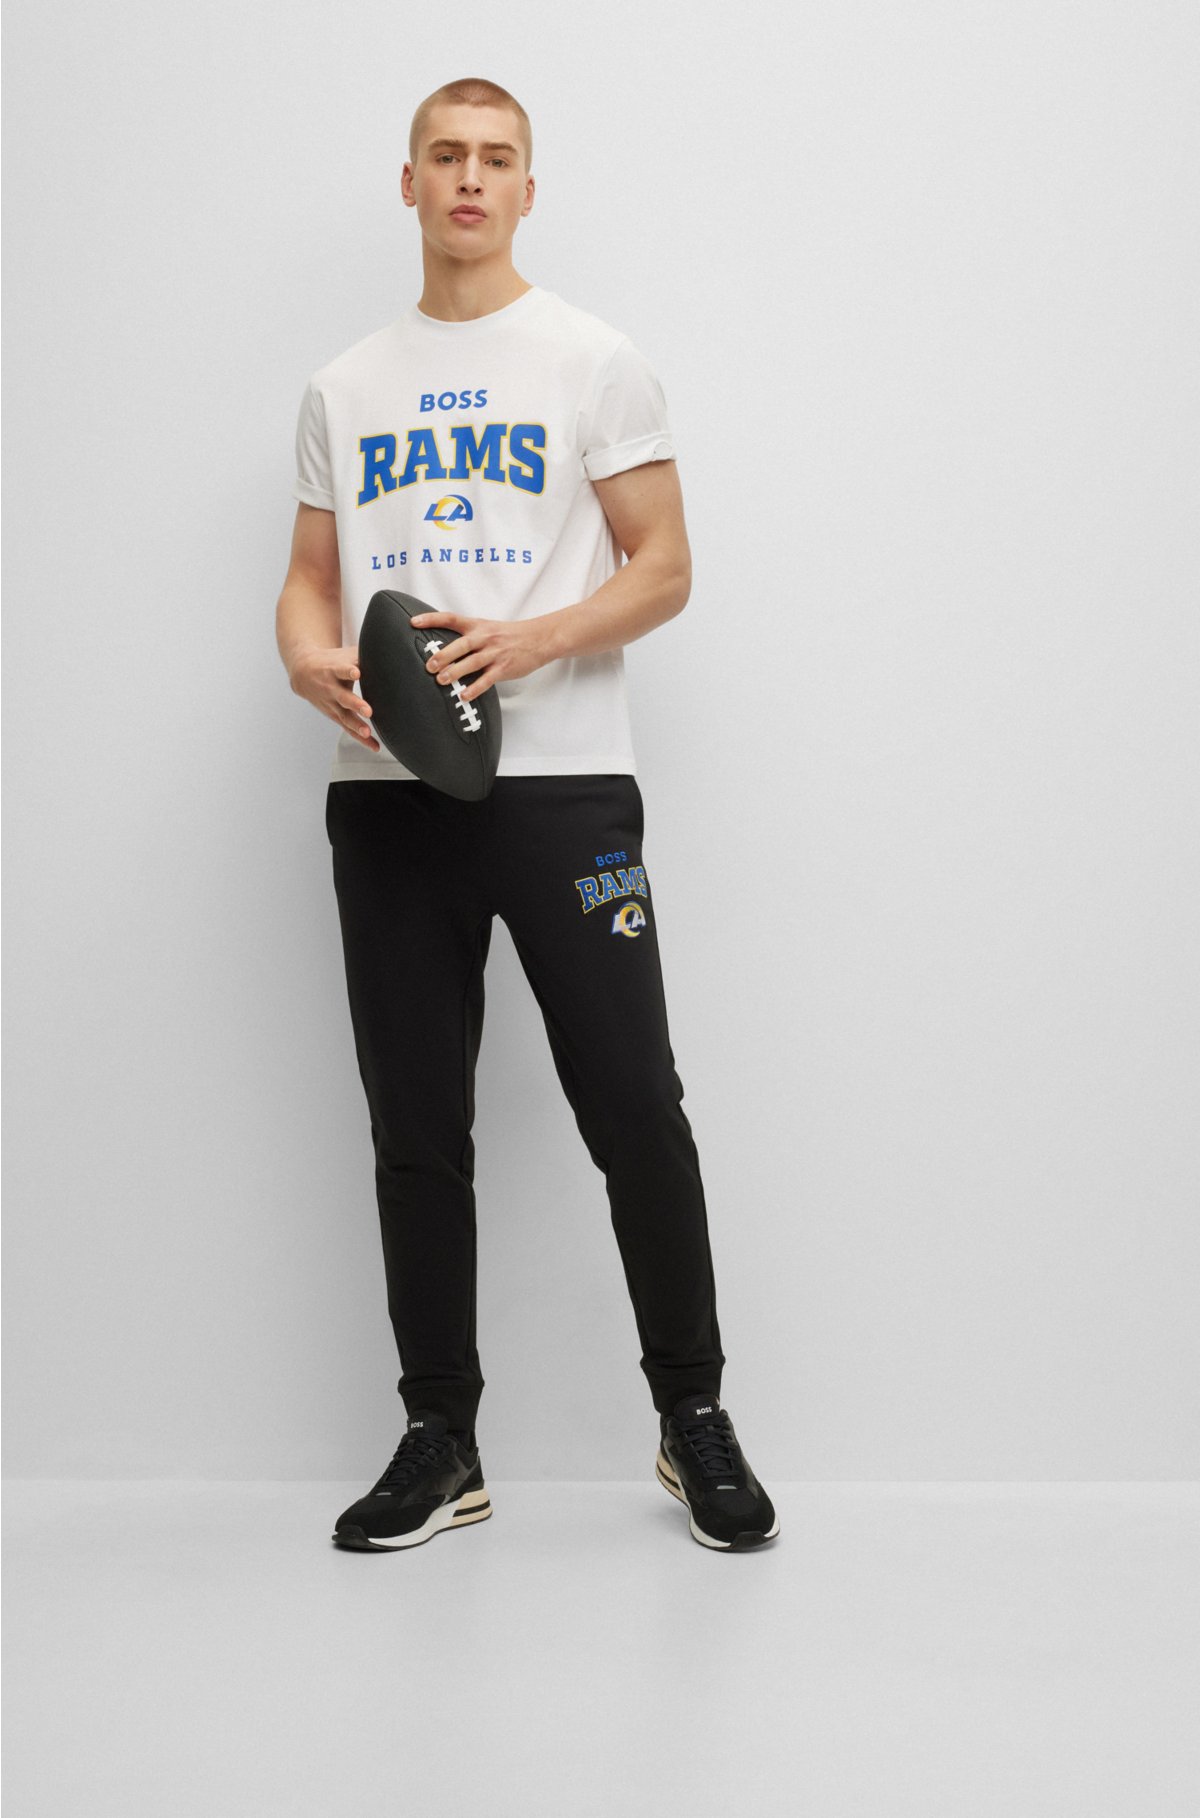 BOSS x NFL stretch-cotton T-shirt with collaborative branding, Rams